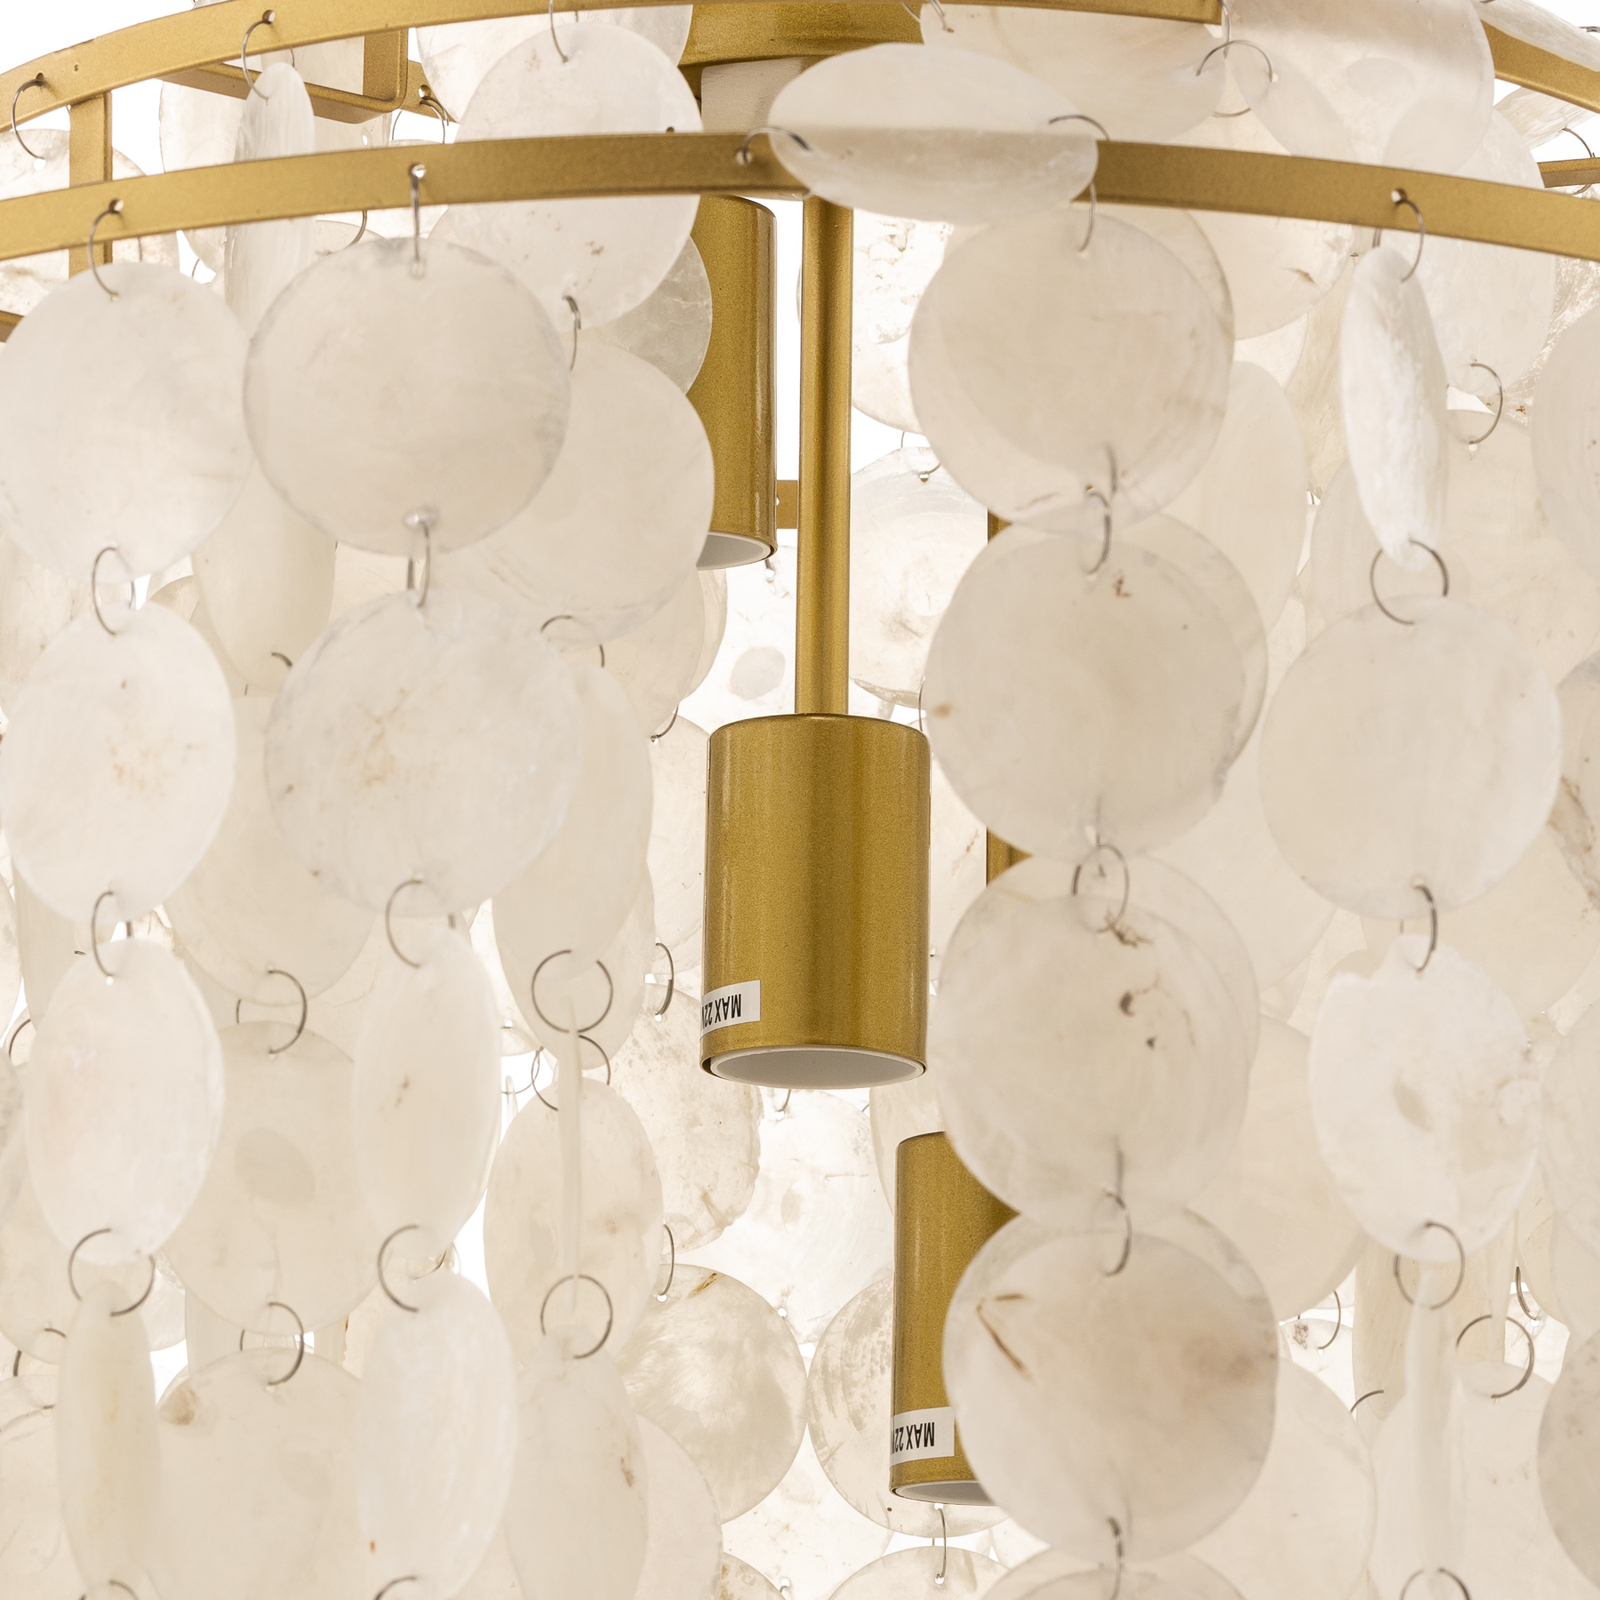 Ruben pendant light with lampshade made of mother-of-pearl discs